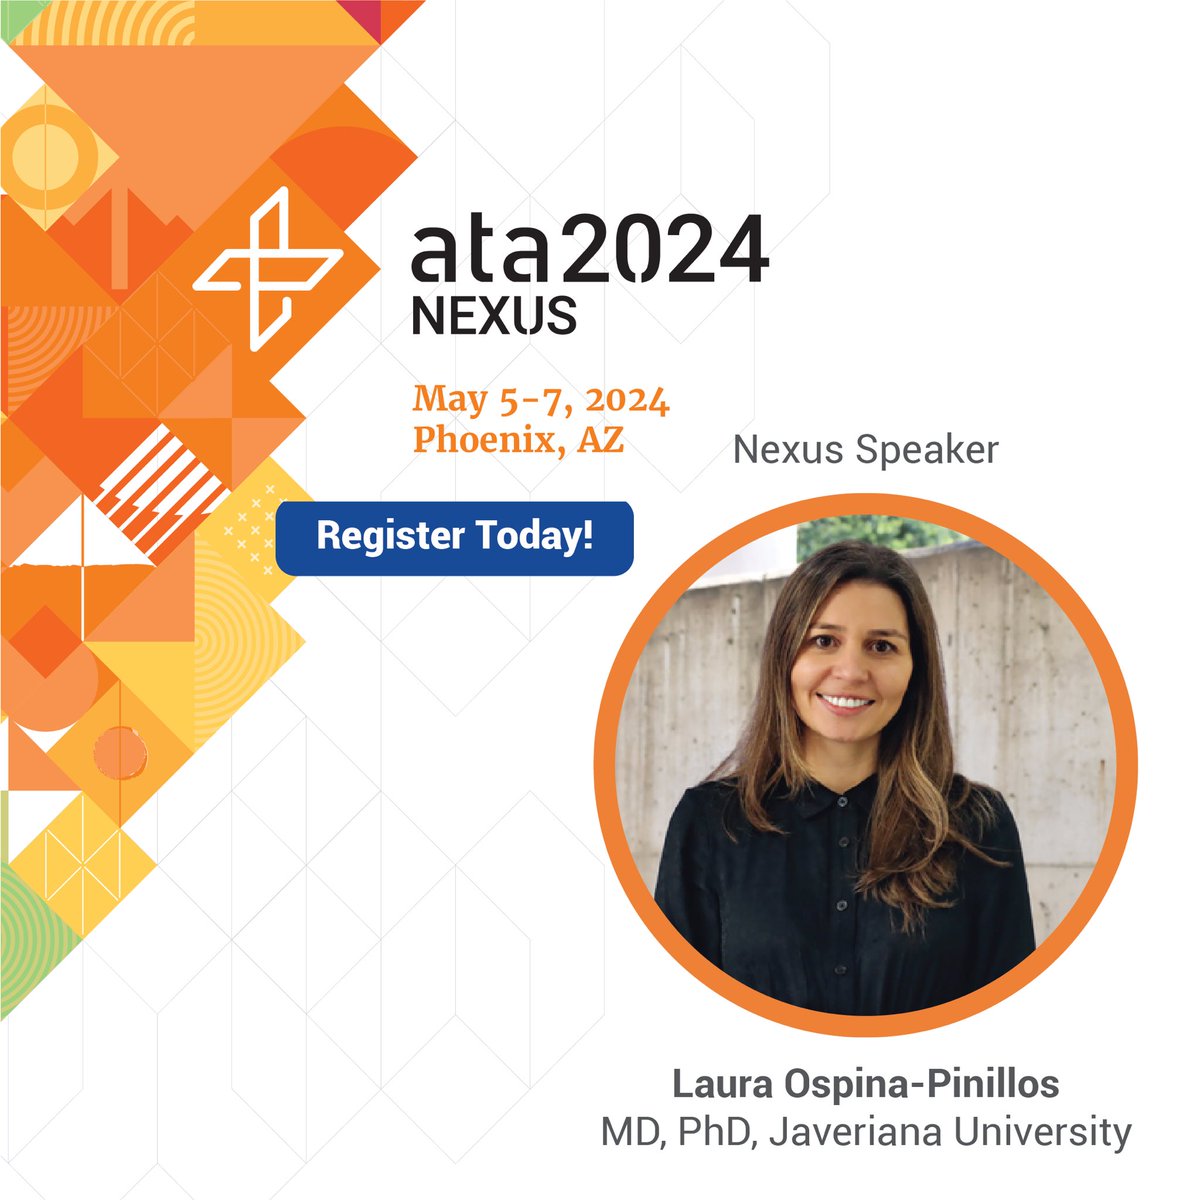 I'm honored to be a speaker at ATA Nexus 2024, where I'll discuss our latest projects on mental health platforms in Colombia.Join us as we dive into the challenges and successes of creating tech solutions that truly make a difference. #mentalhealth #ATANexus2024 #TechForGood